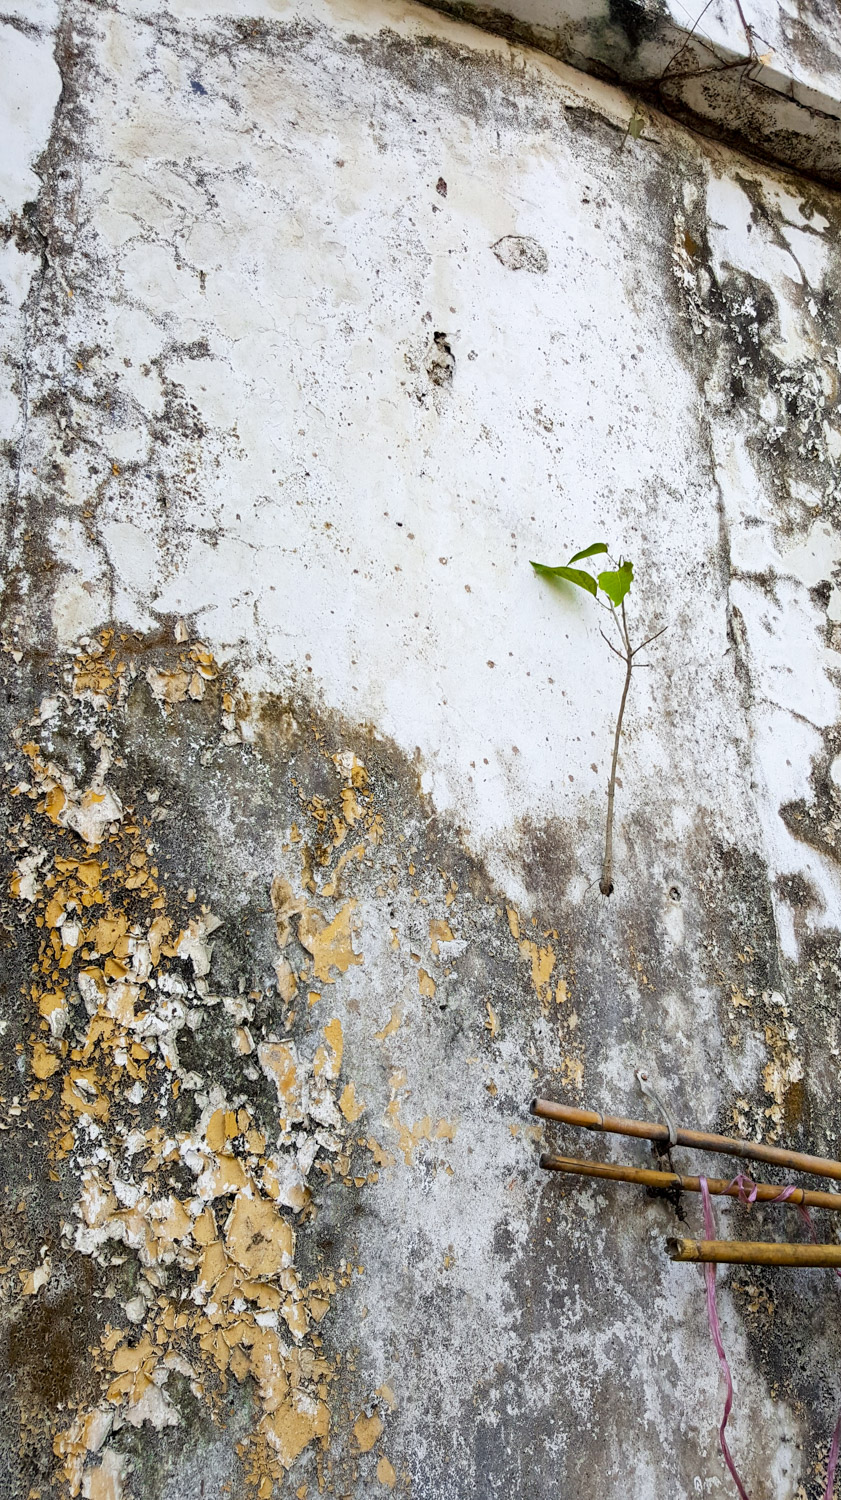 There is a plant. Growing out of a tiny hole in the wall. About two metres off the ground. Go little plant.